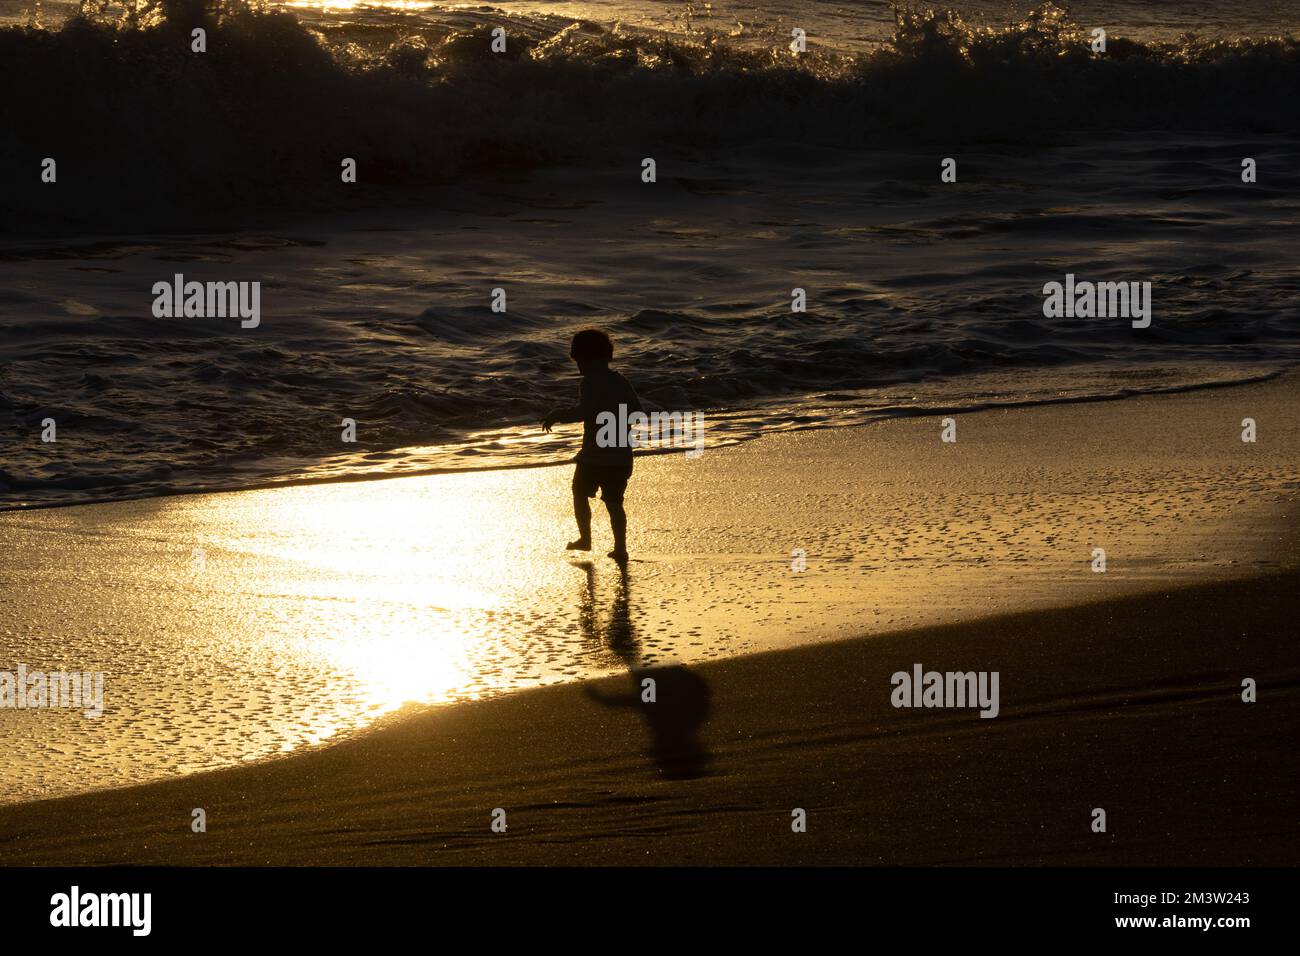 Wanganui New Zealand - April 9 2022; Walking legs of Unrecognizable Young person at waters edge on surf beach in silhouette back-lit by sunset Stock Photo